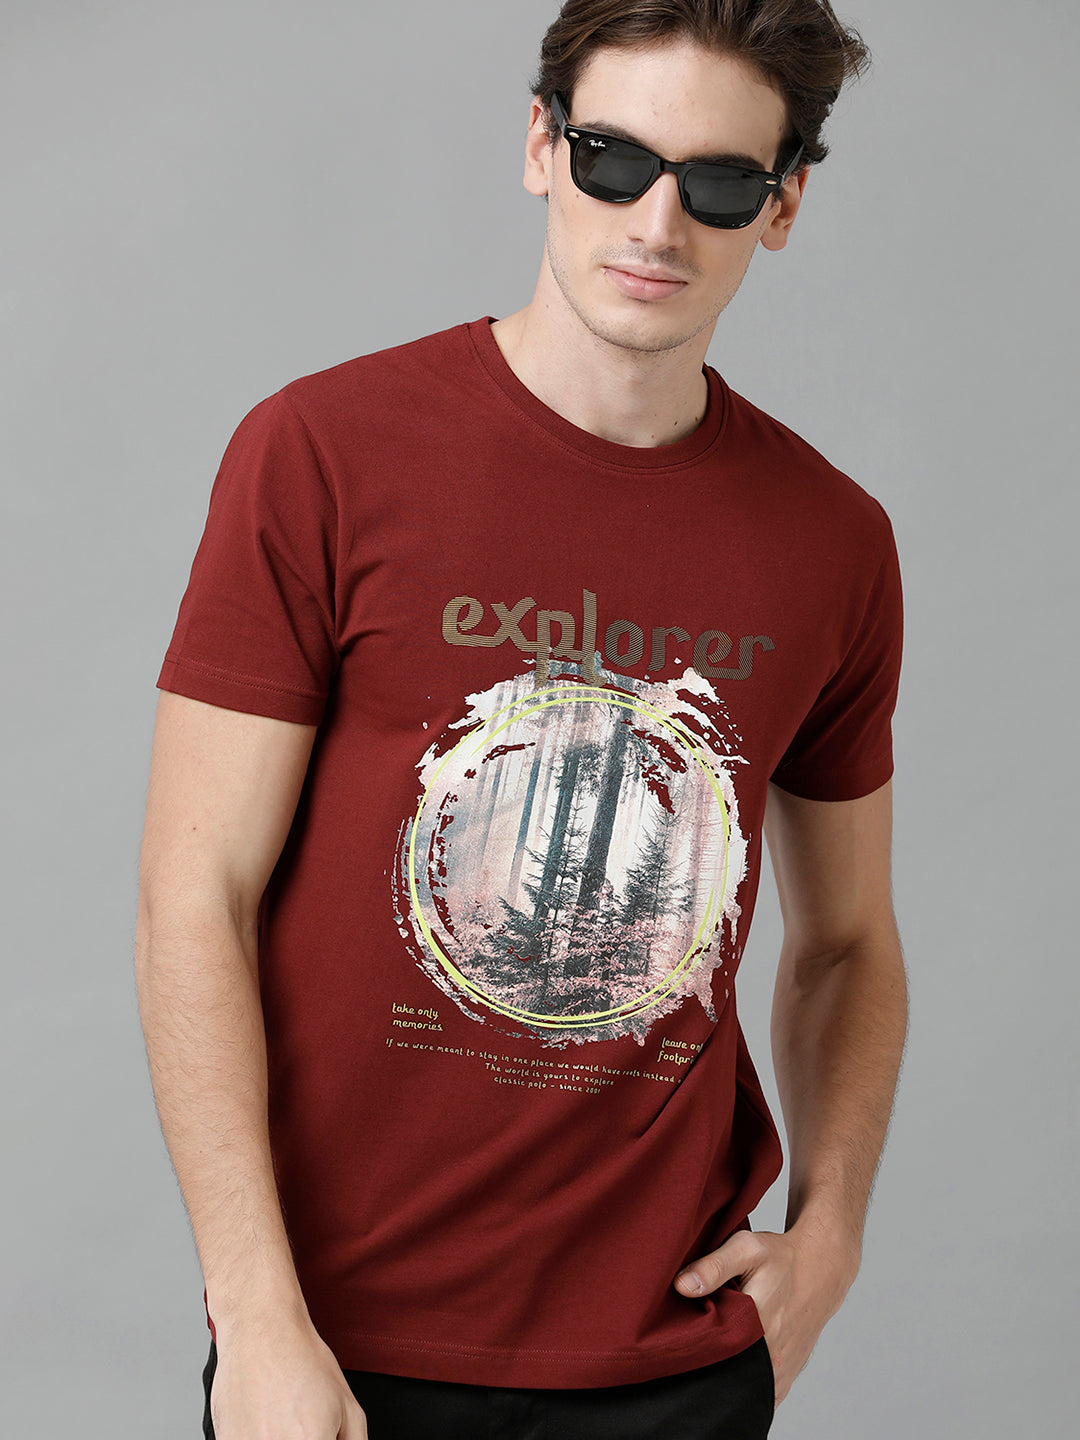 Classic Polo Men's Cotton Printed Half Sleeve Slim Fit Round Neck Maroon Color T-Shirt | Baleno - 505 B